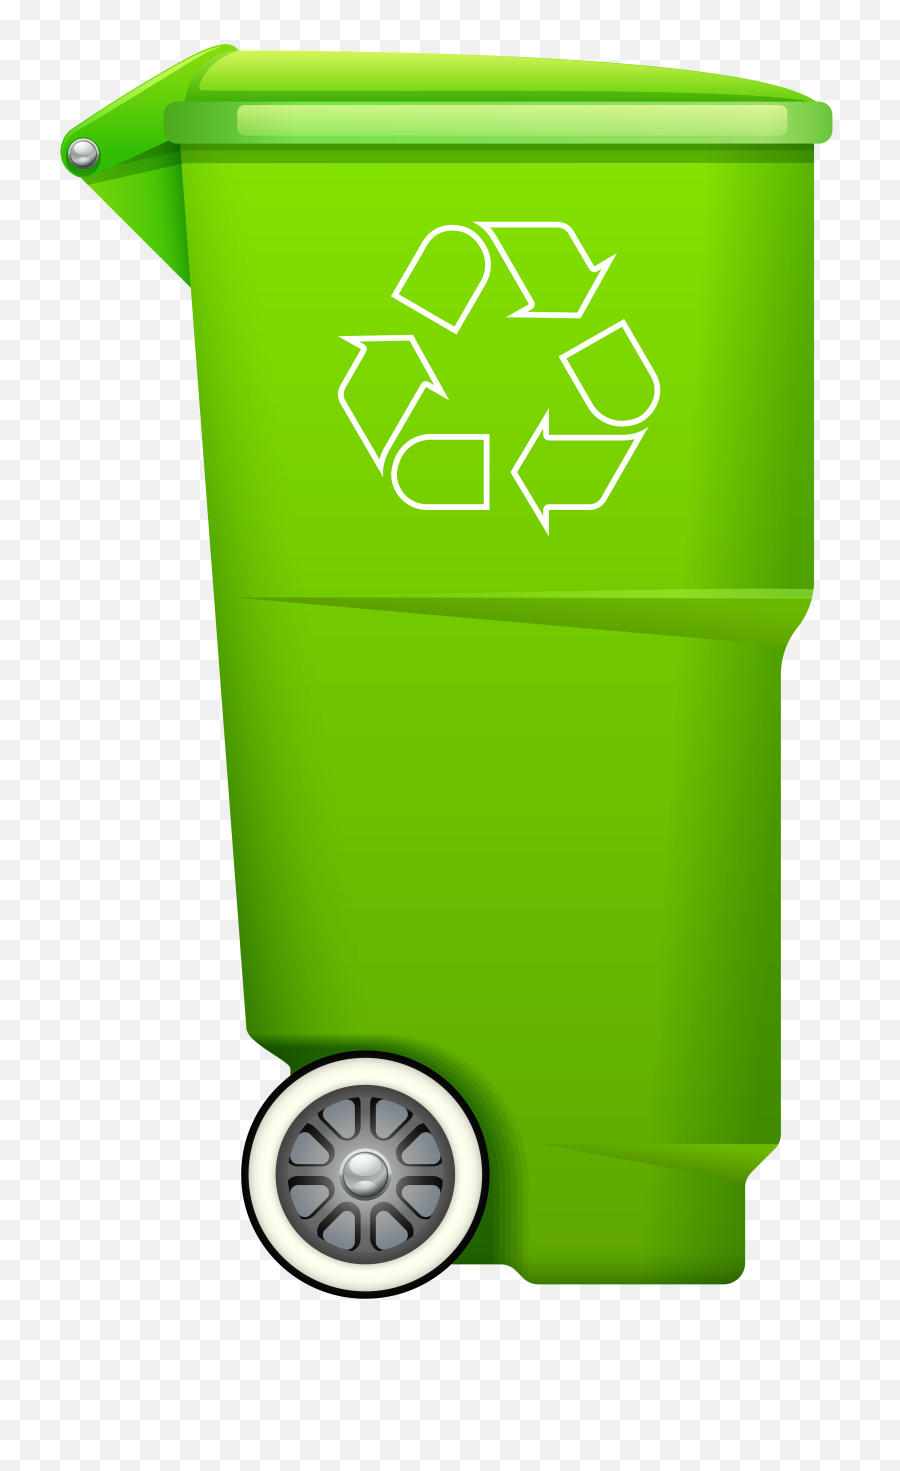 Garbage Trash Bin With Recycle Symbol - Recycle Bin Clipart Png,Trash Can Transparent Background